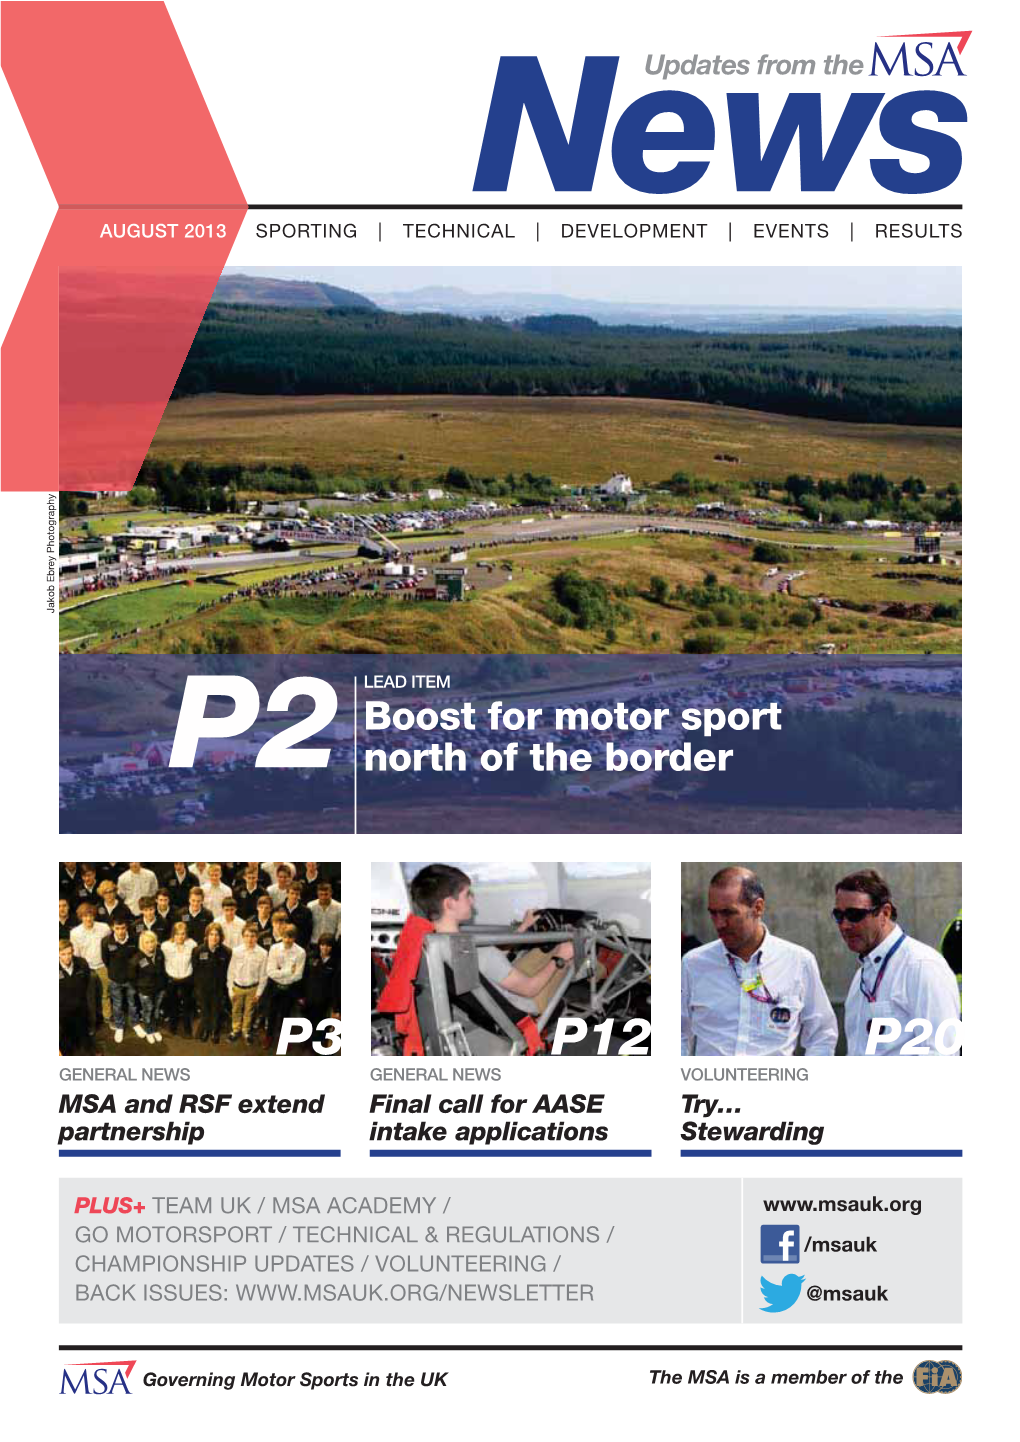 P3 P12 P20 GENERAL NEWS GENERAL NEWS VOLUNTEERING MSA and RSF Extend Final Call for AASE Try… Partnership Intake Applications Stewarding